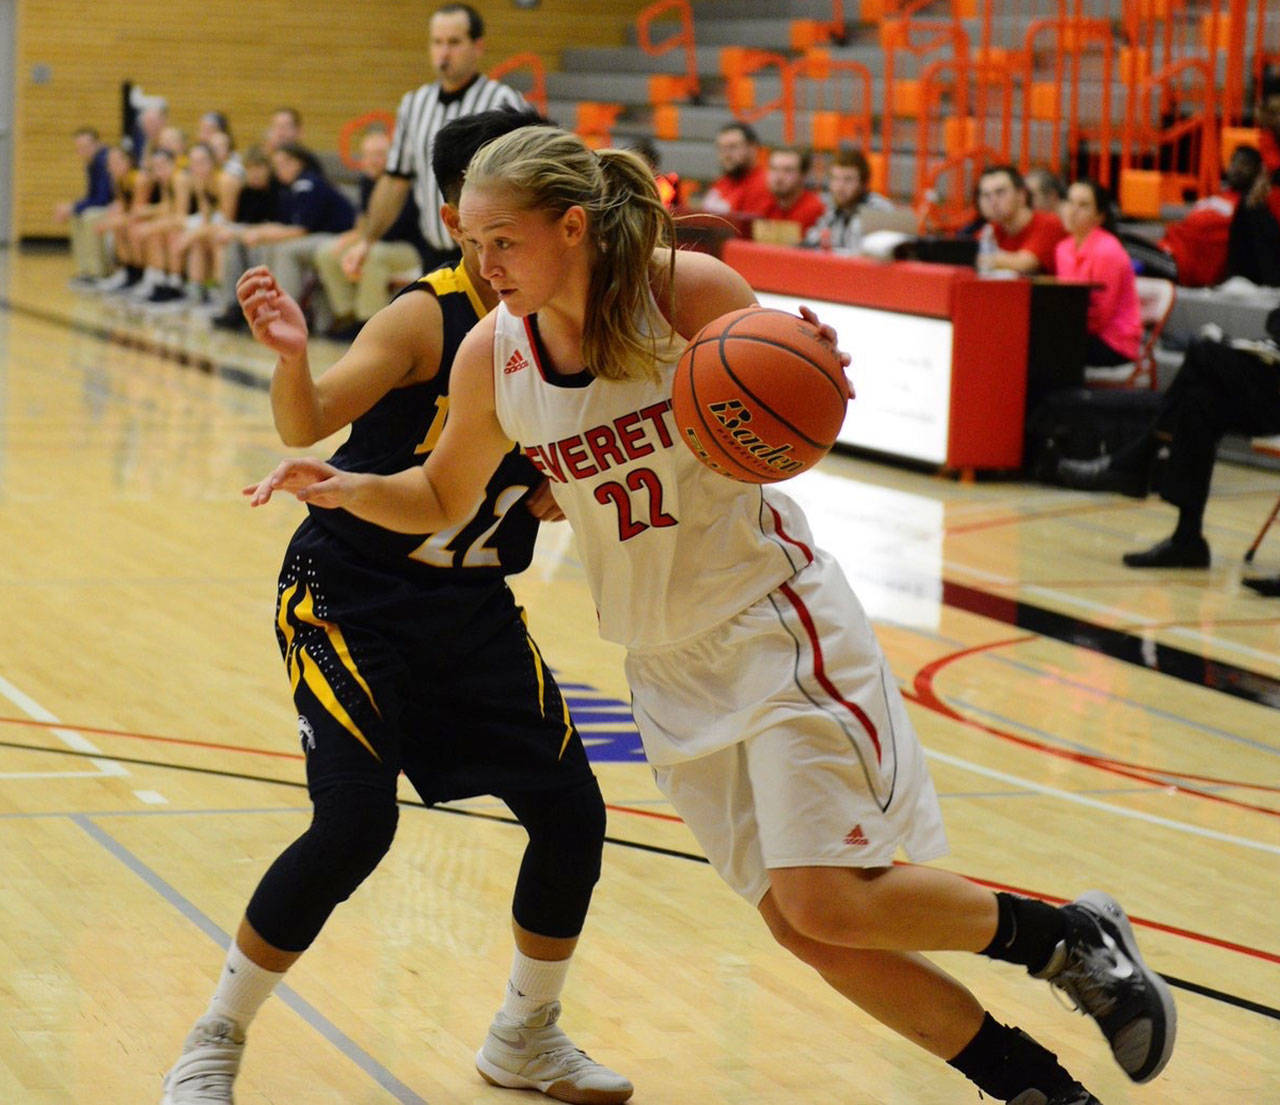 Forward Lily Hilderbrand (22) averaged 12.1 points and 7.2 rebounds per game for Everett Community College this past season. (submitted photo)